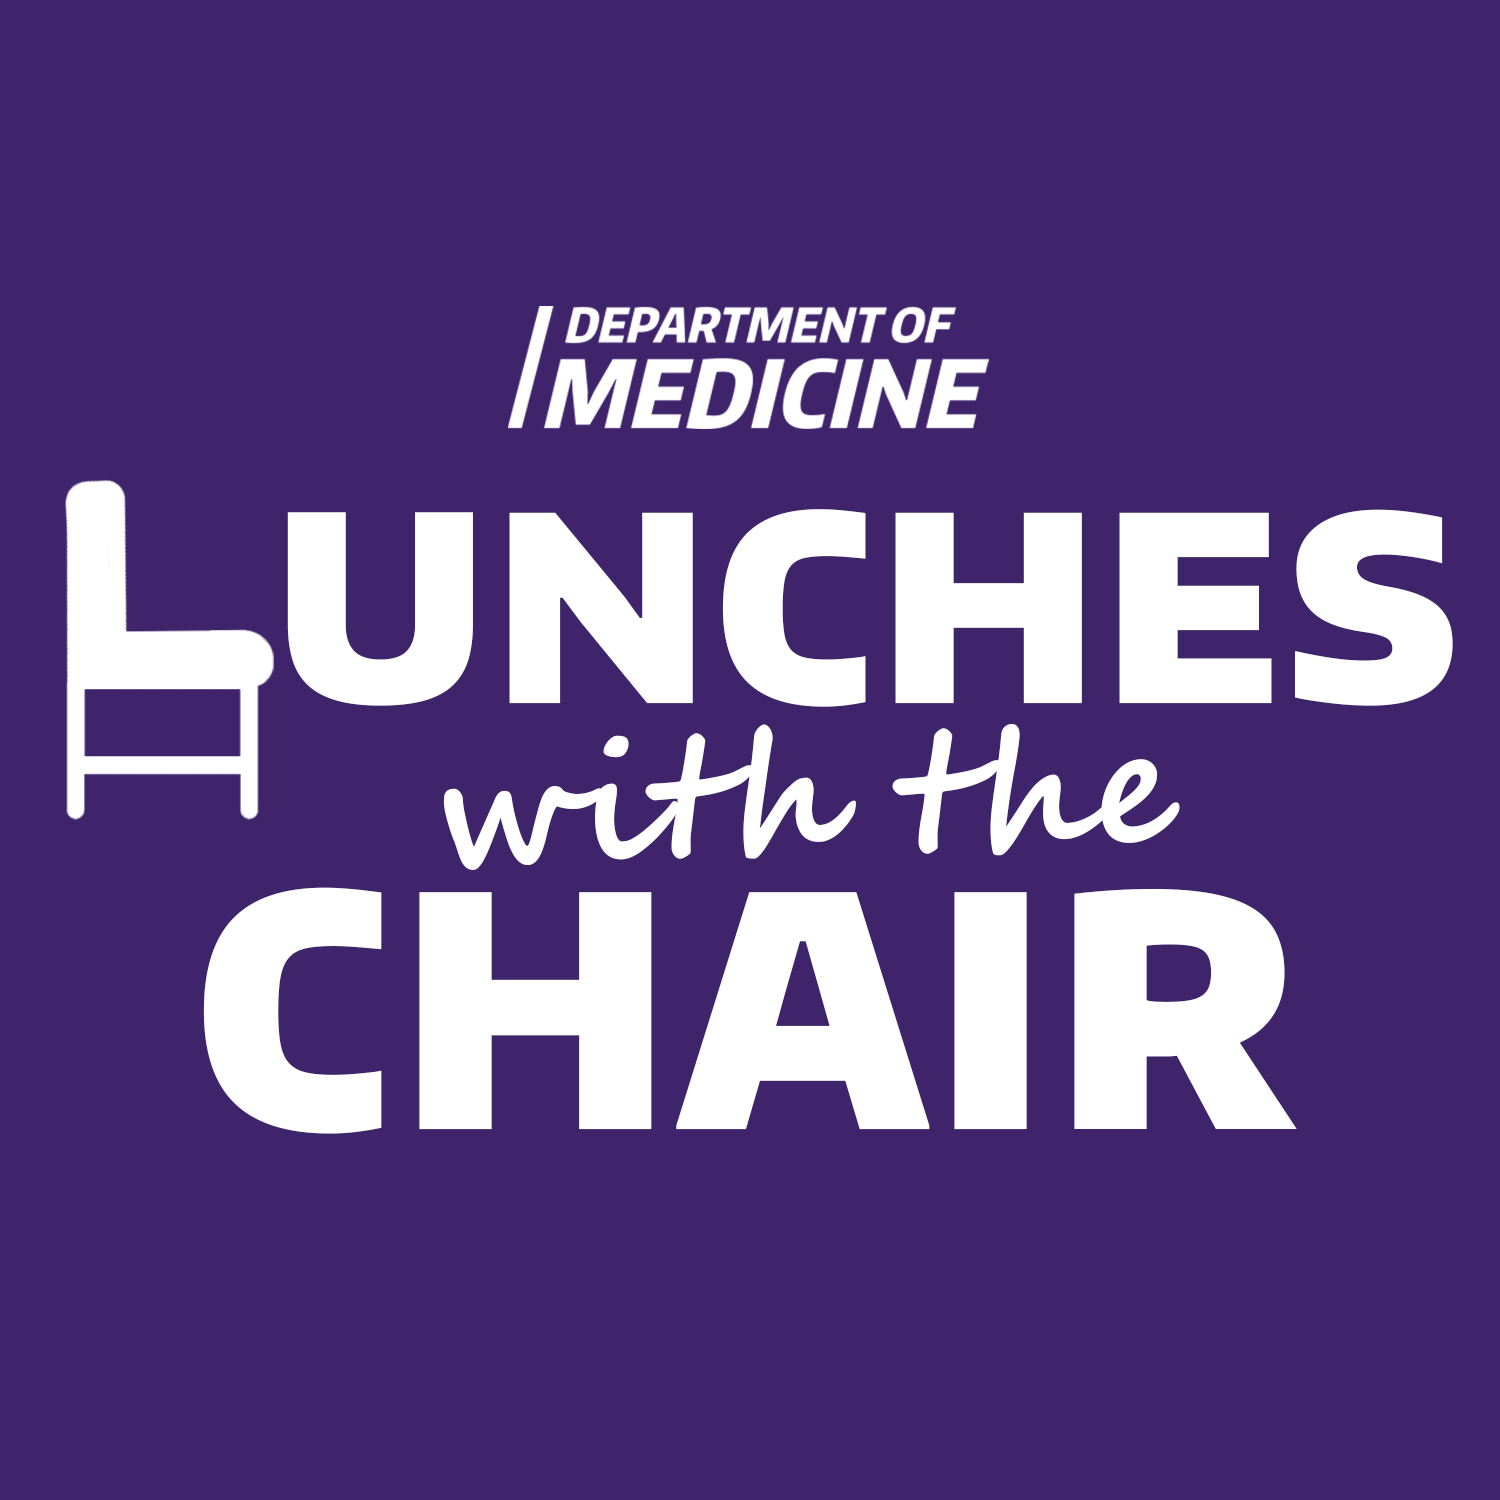 Lunches with the chair logo